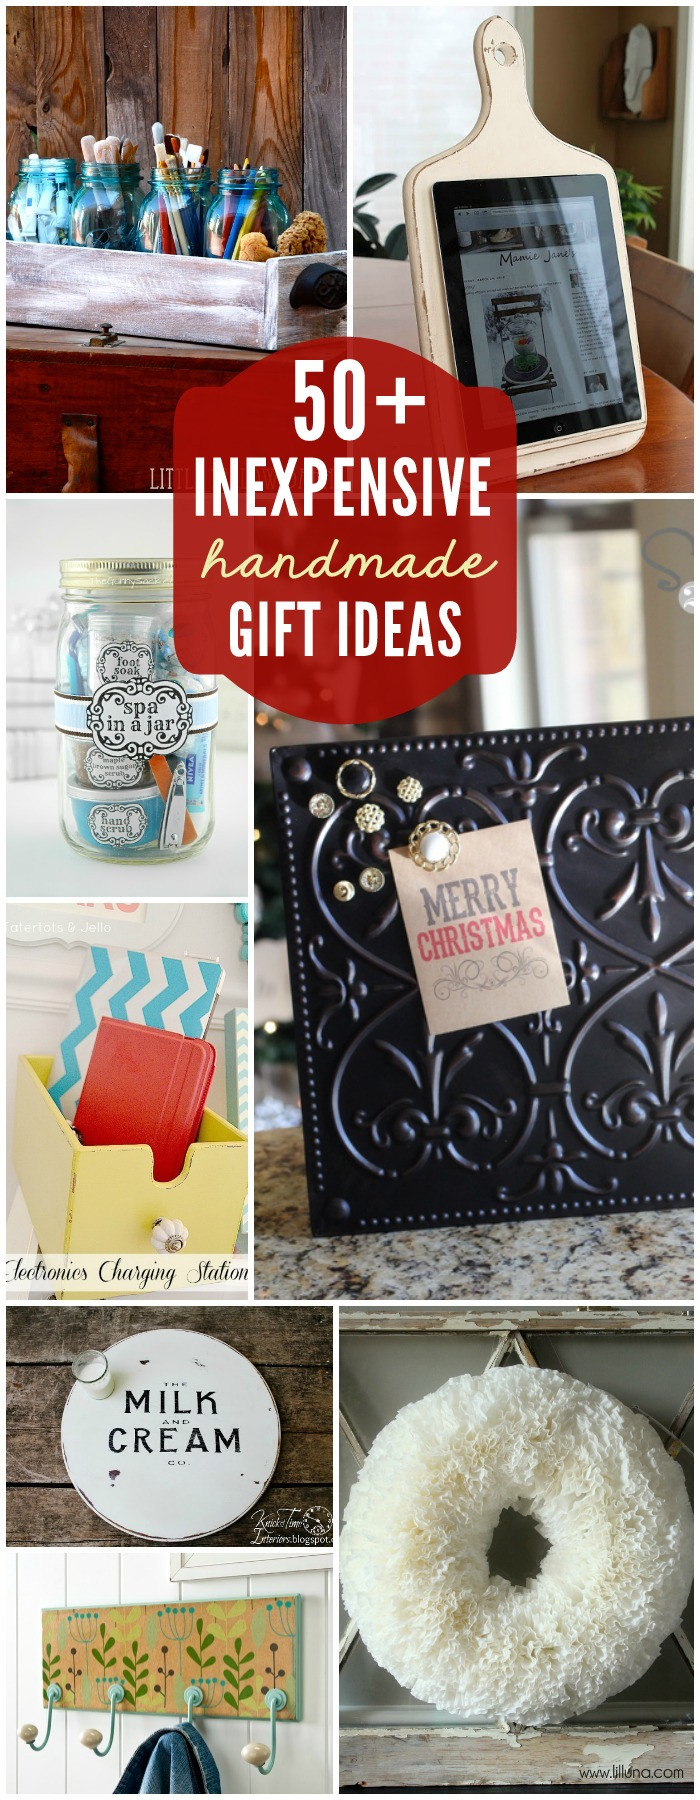 DIY Gifts For Christmas
 Easy DIY Gift Ideas